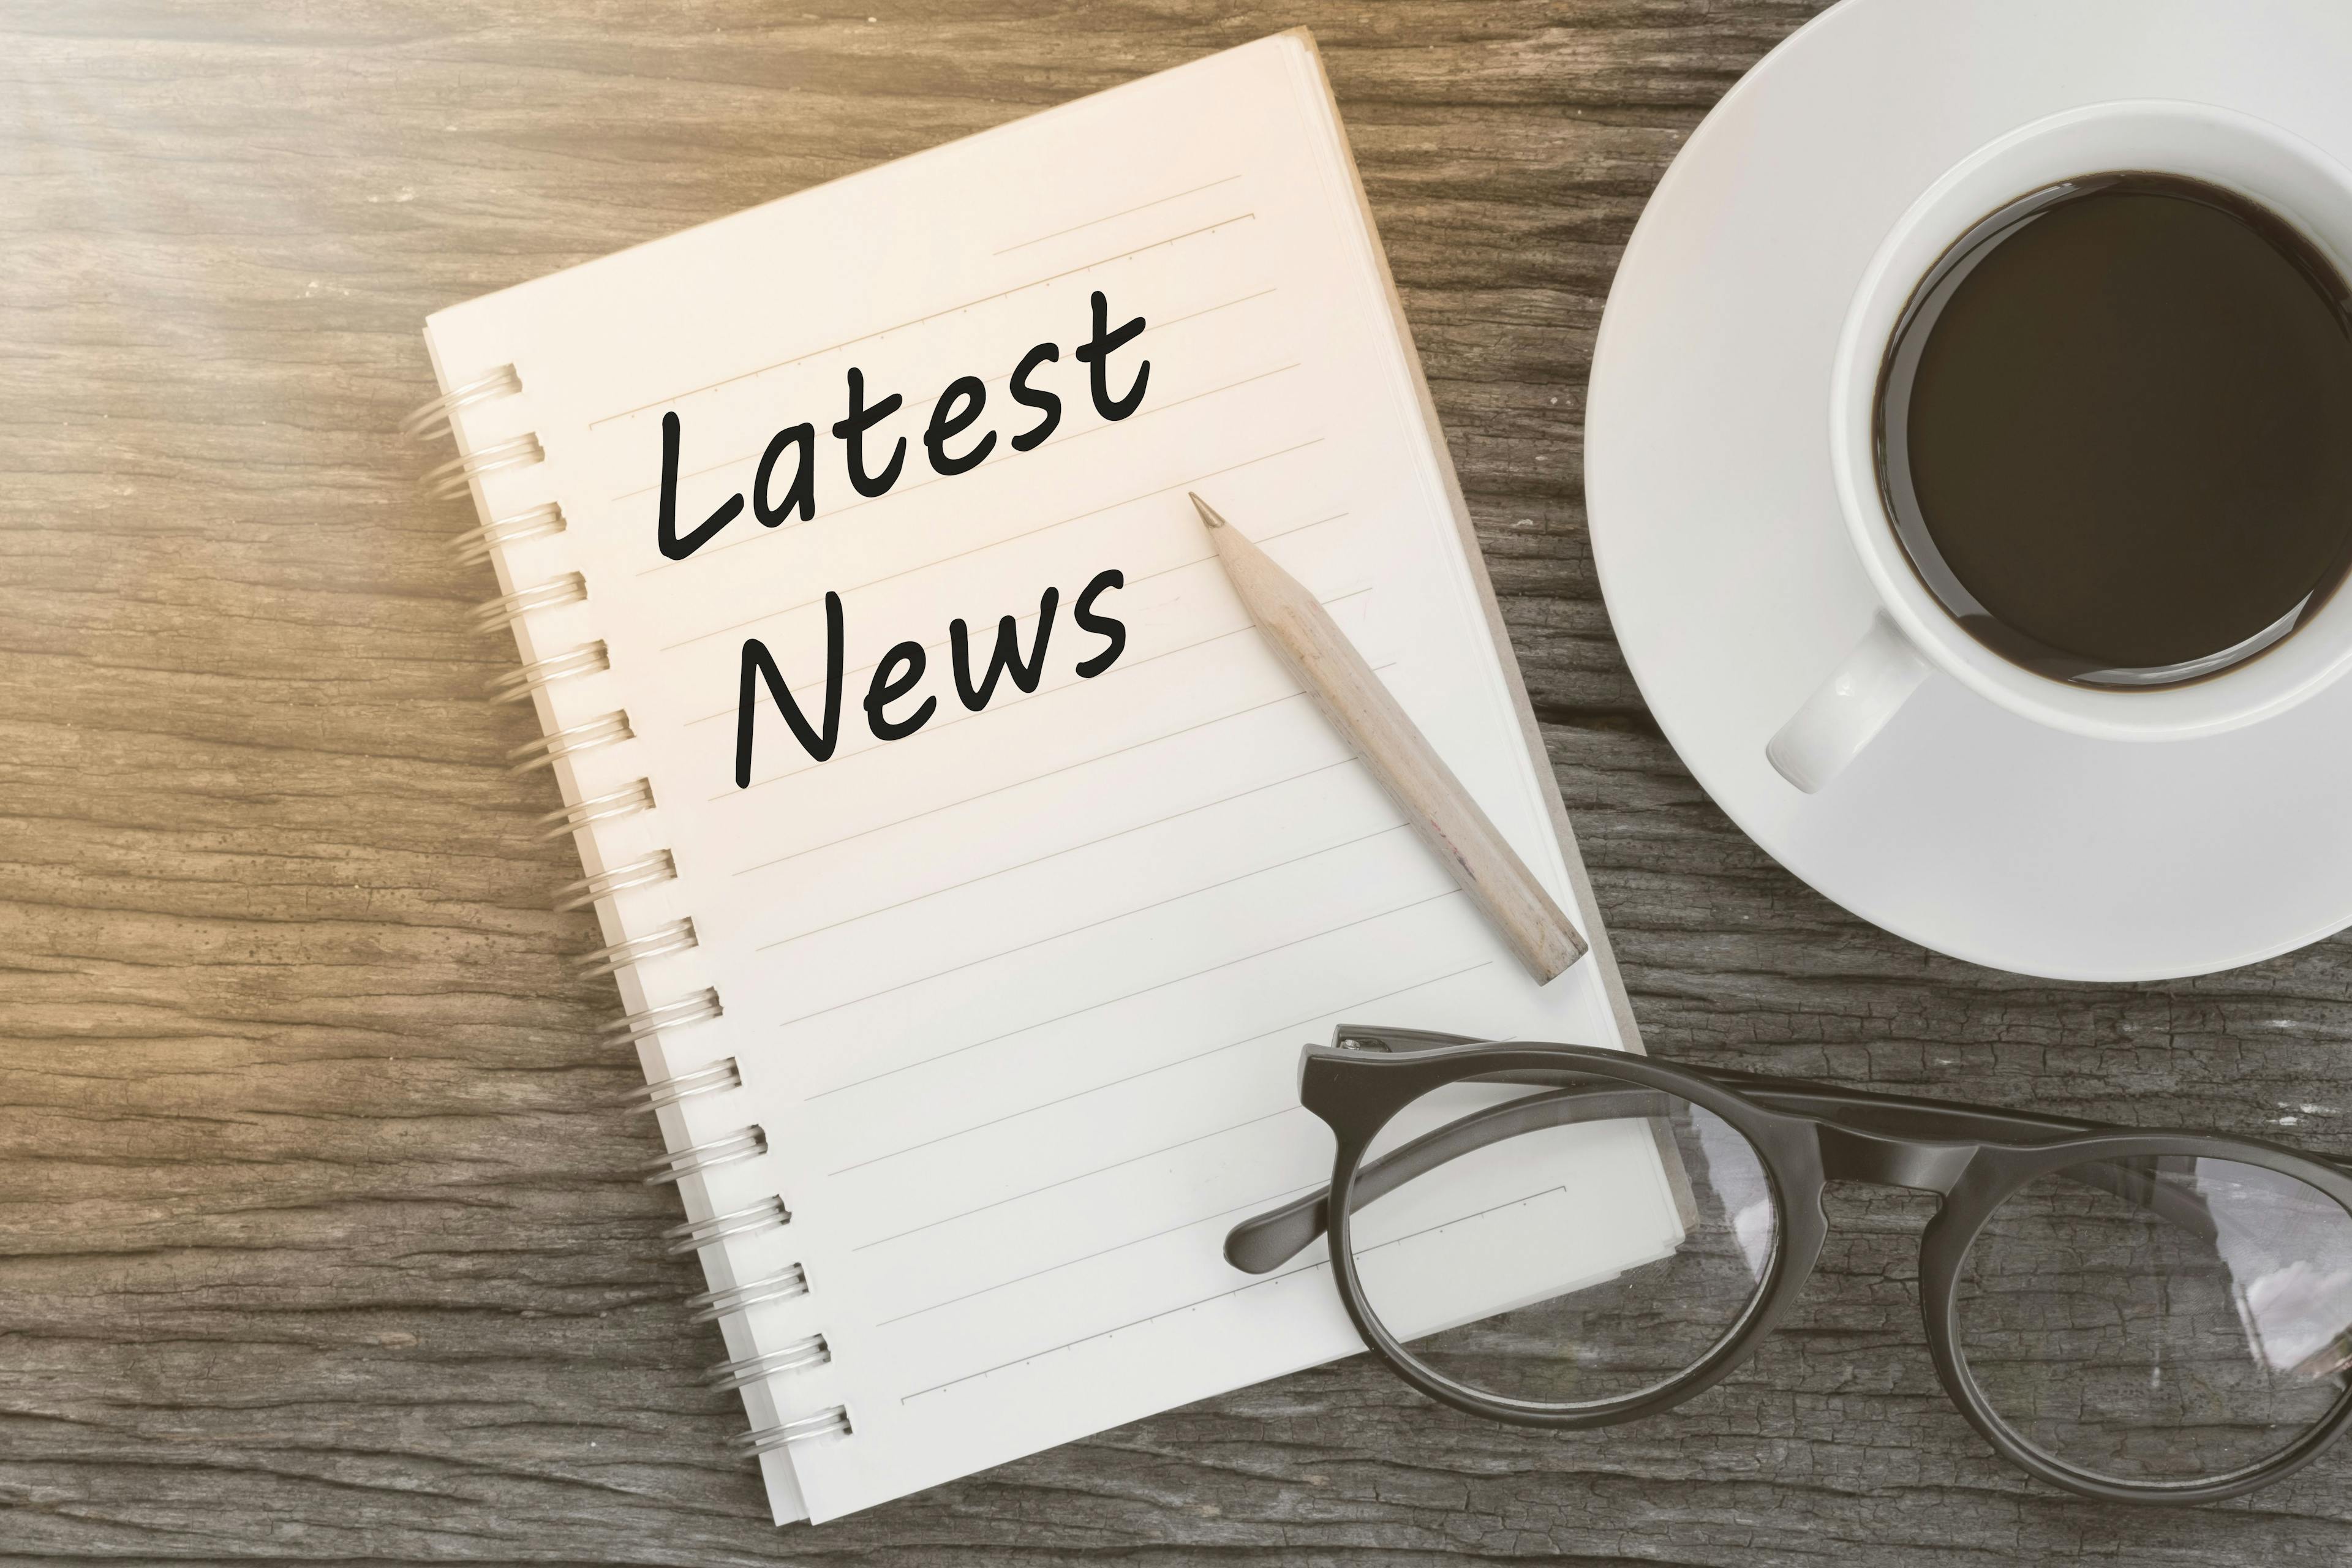 News wrap-up: This week's veterinary headlines, plus PrideVMC hosts some exciting Pride Month events